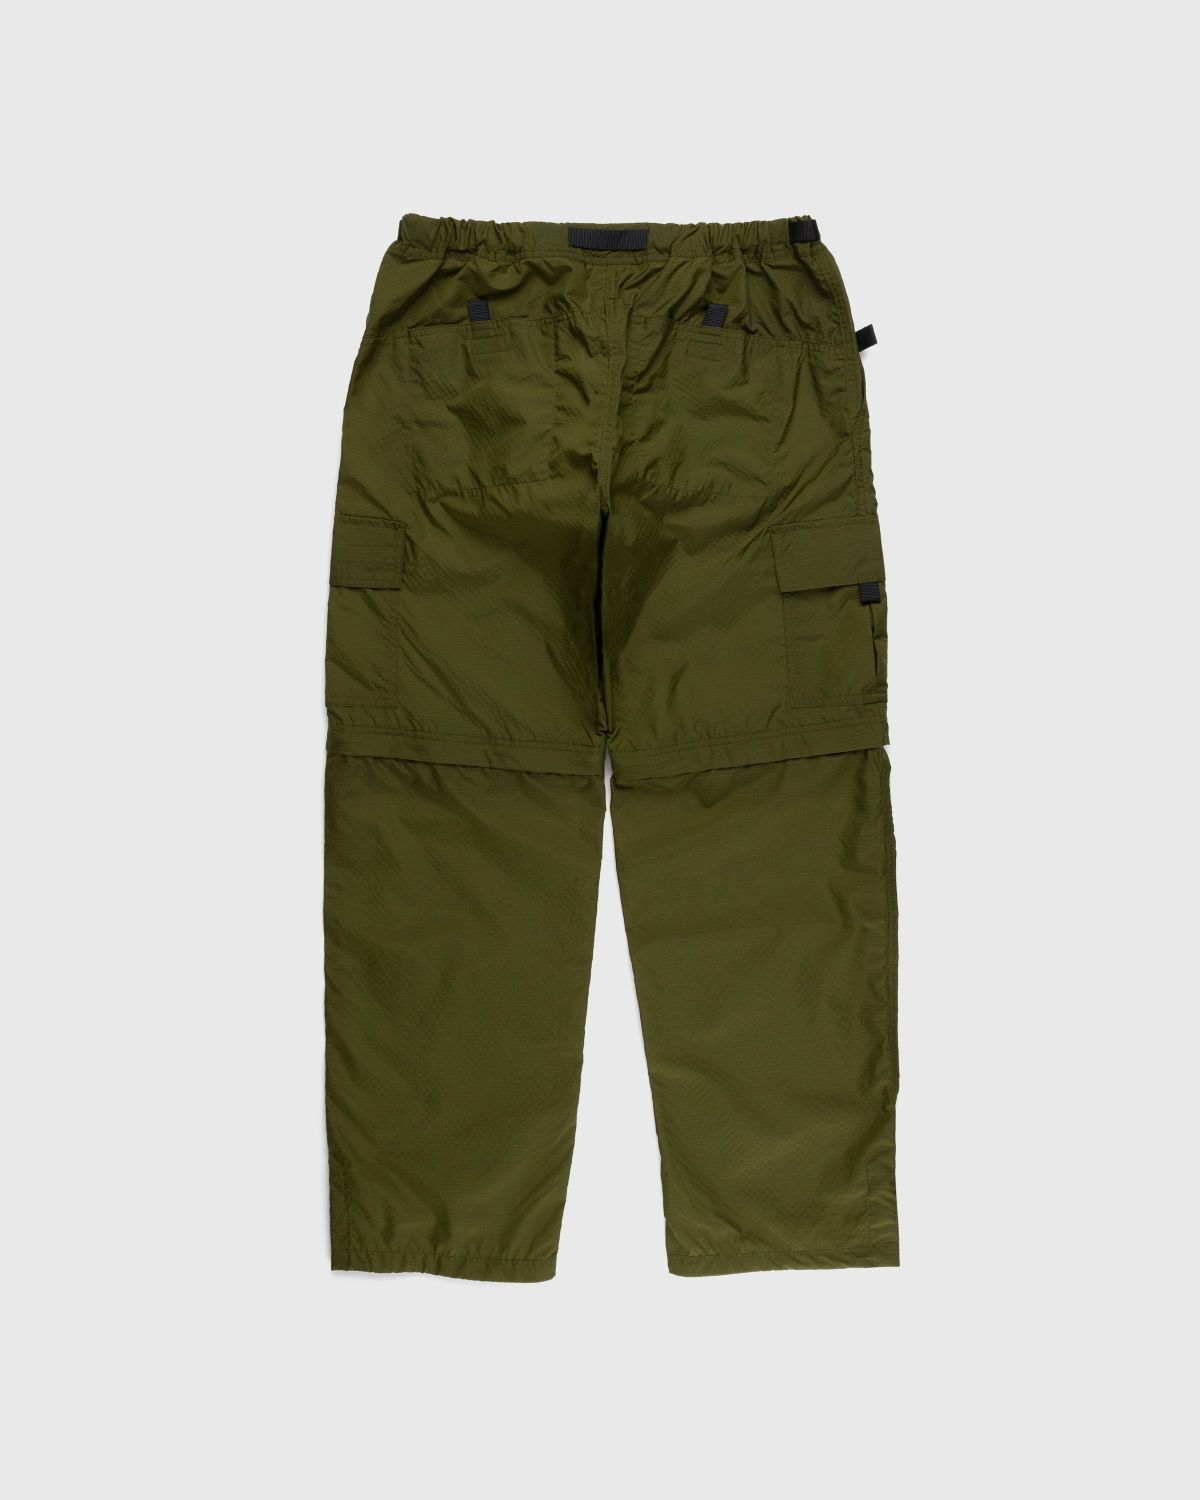 Gramicci – Utility Zip-Off Cargo Pant Army Green - Pants - Green - Image 1